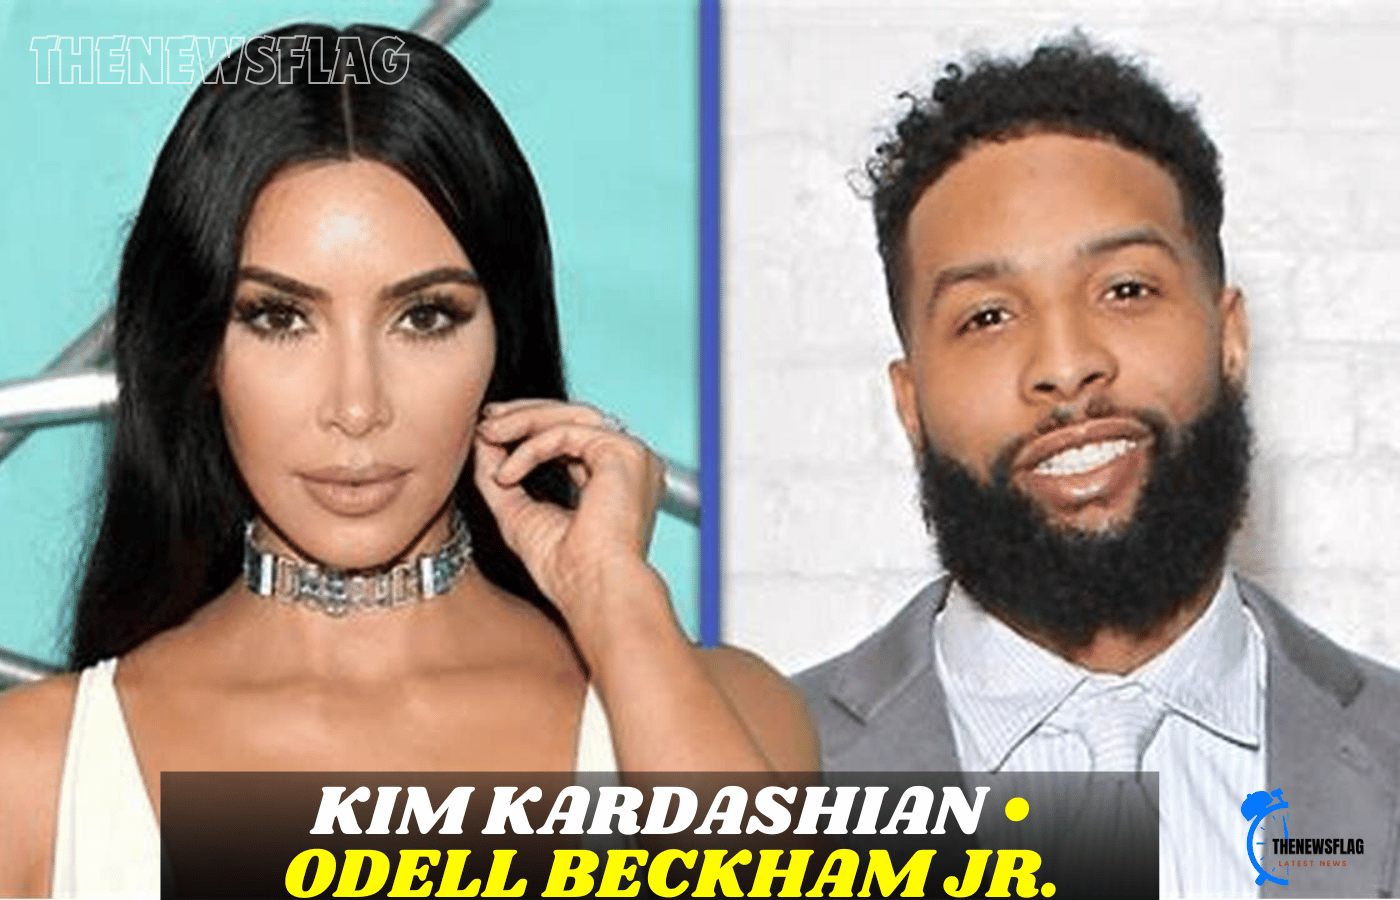 Following Travis Kelce and Taylor Swift's dominance last season, Kim Kardashian and Odell Beckham Jr. intend to become the NFL's secret power couple.